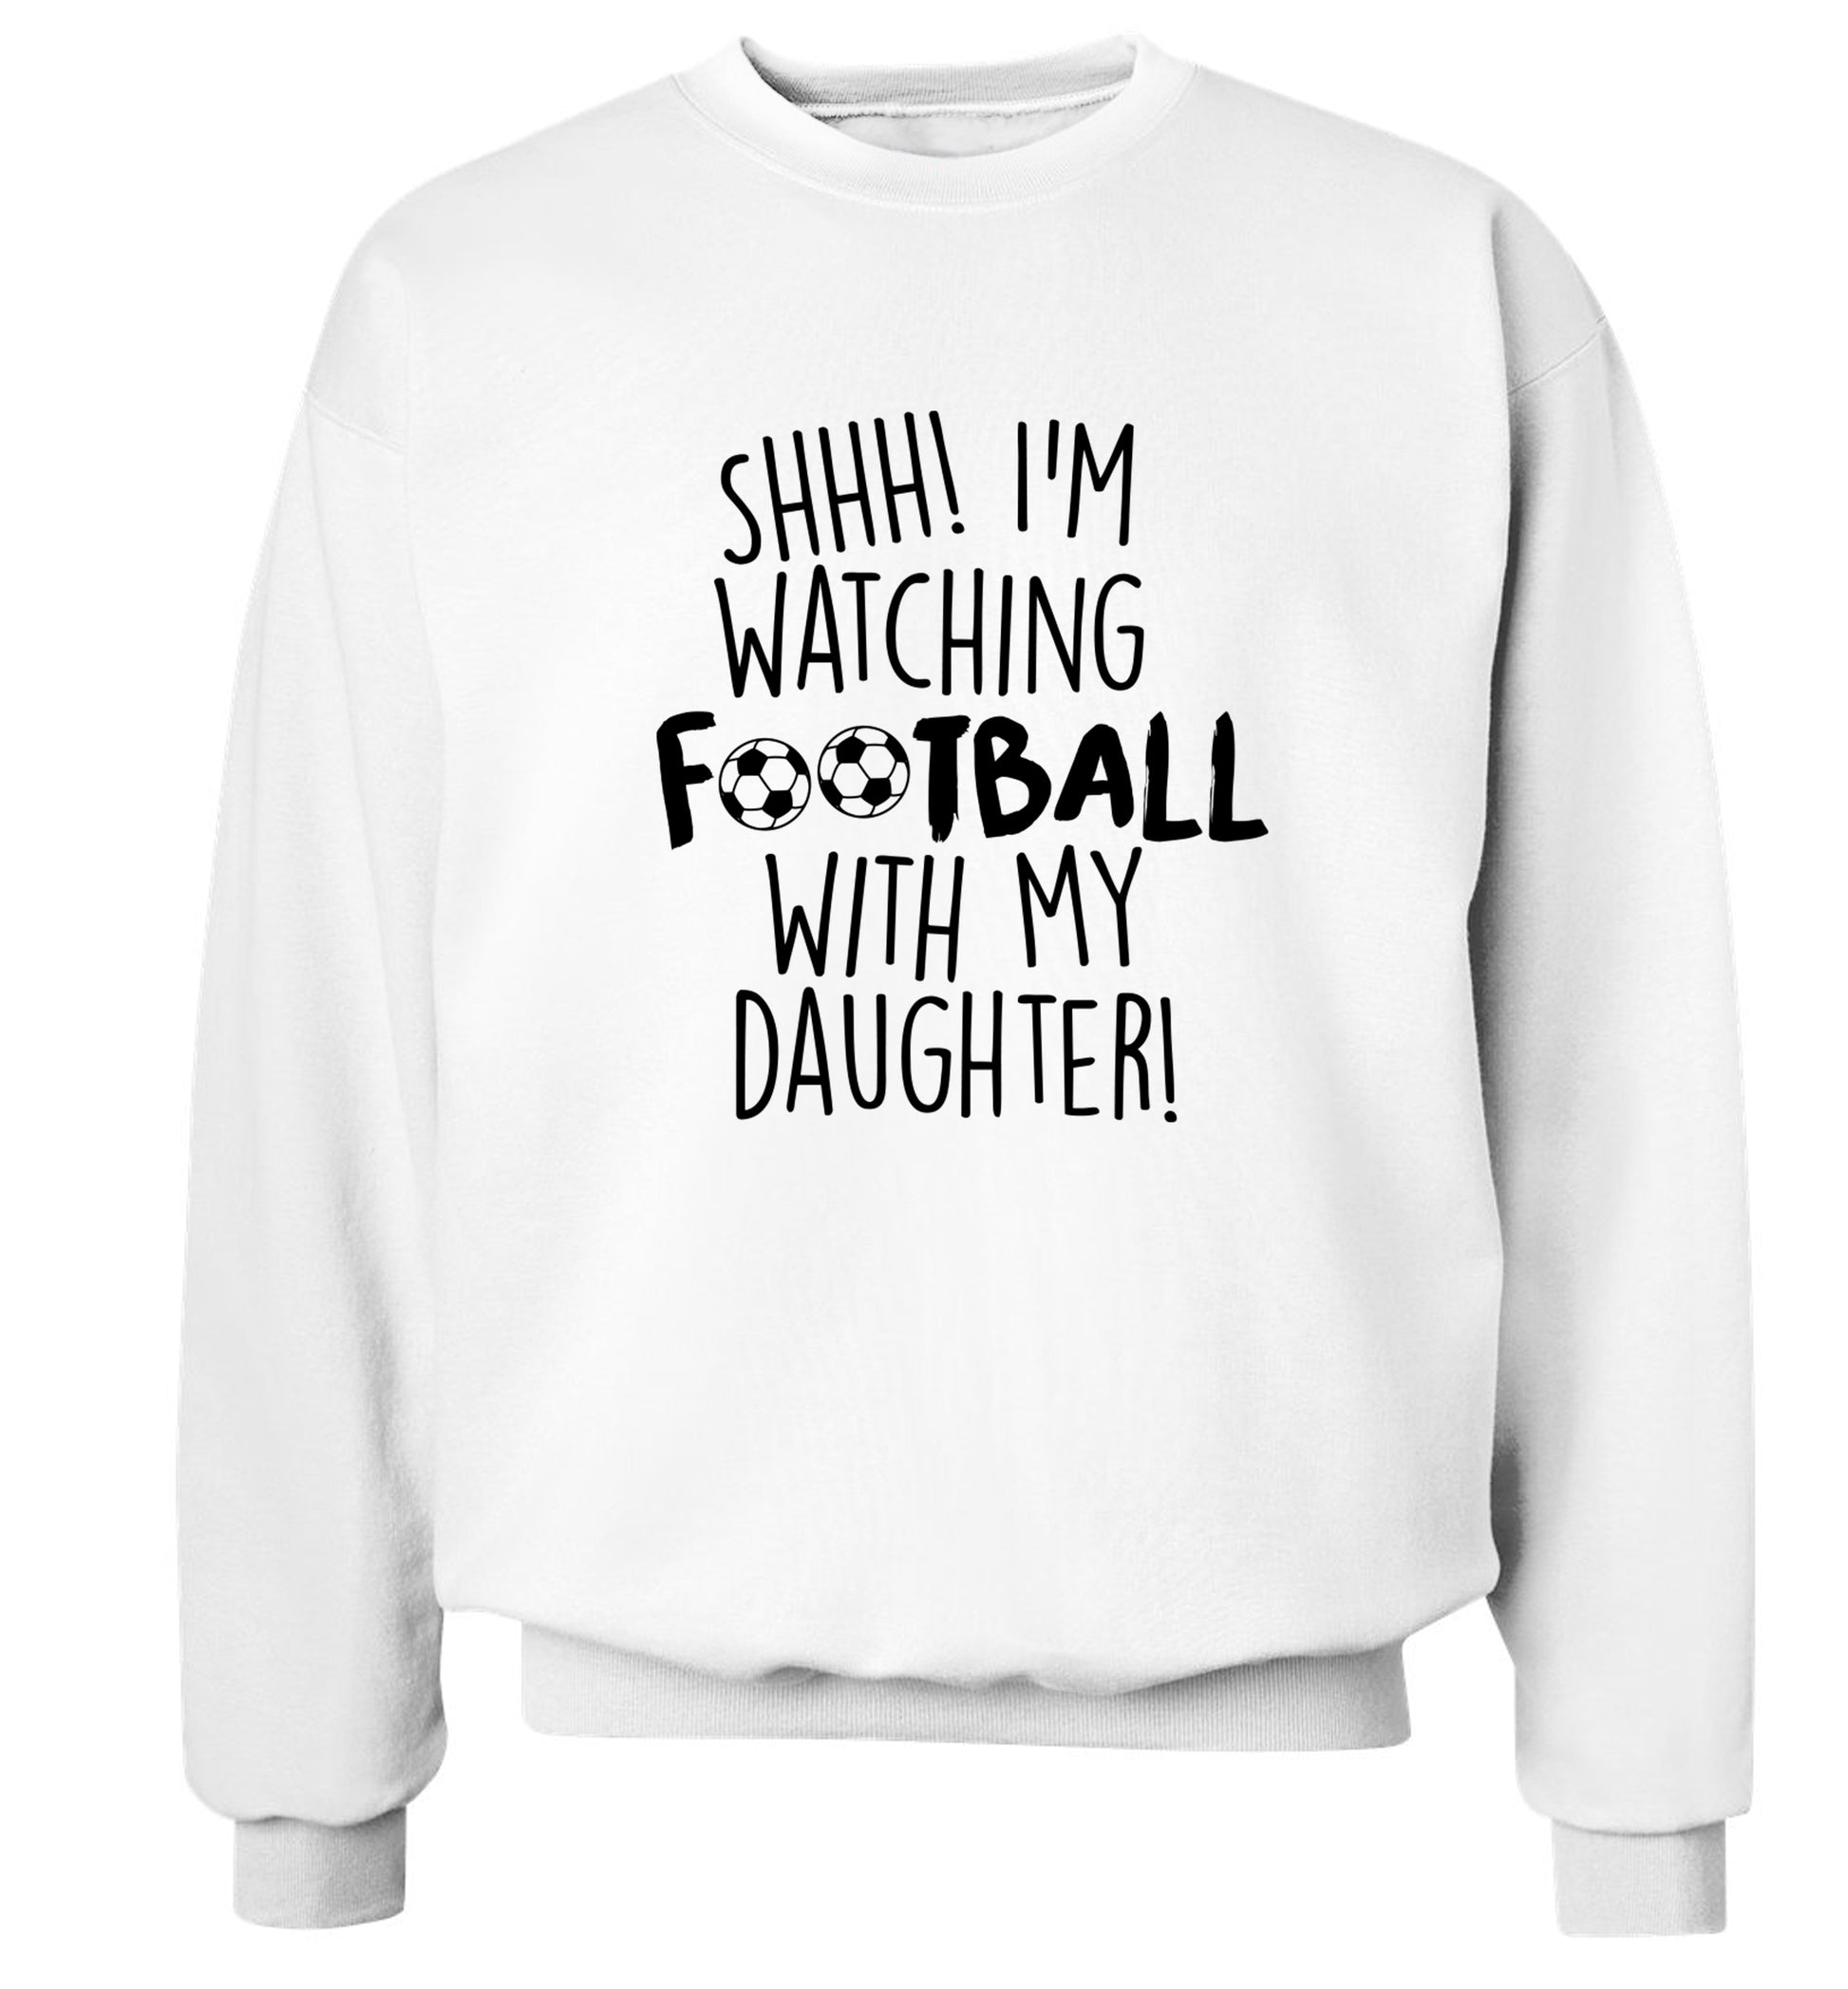 Shhh I'm watching football with my daughter Adult's unisexwhite Sweater 2XL